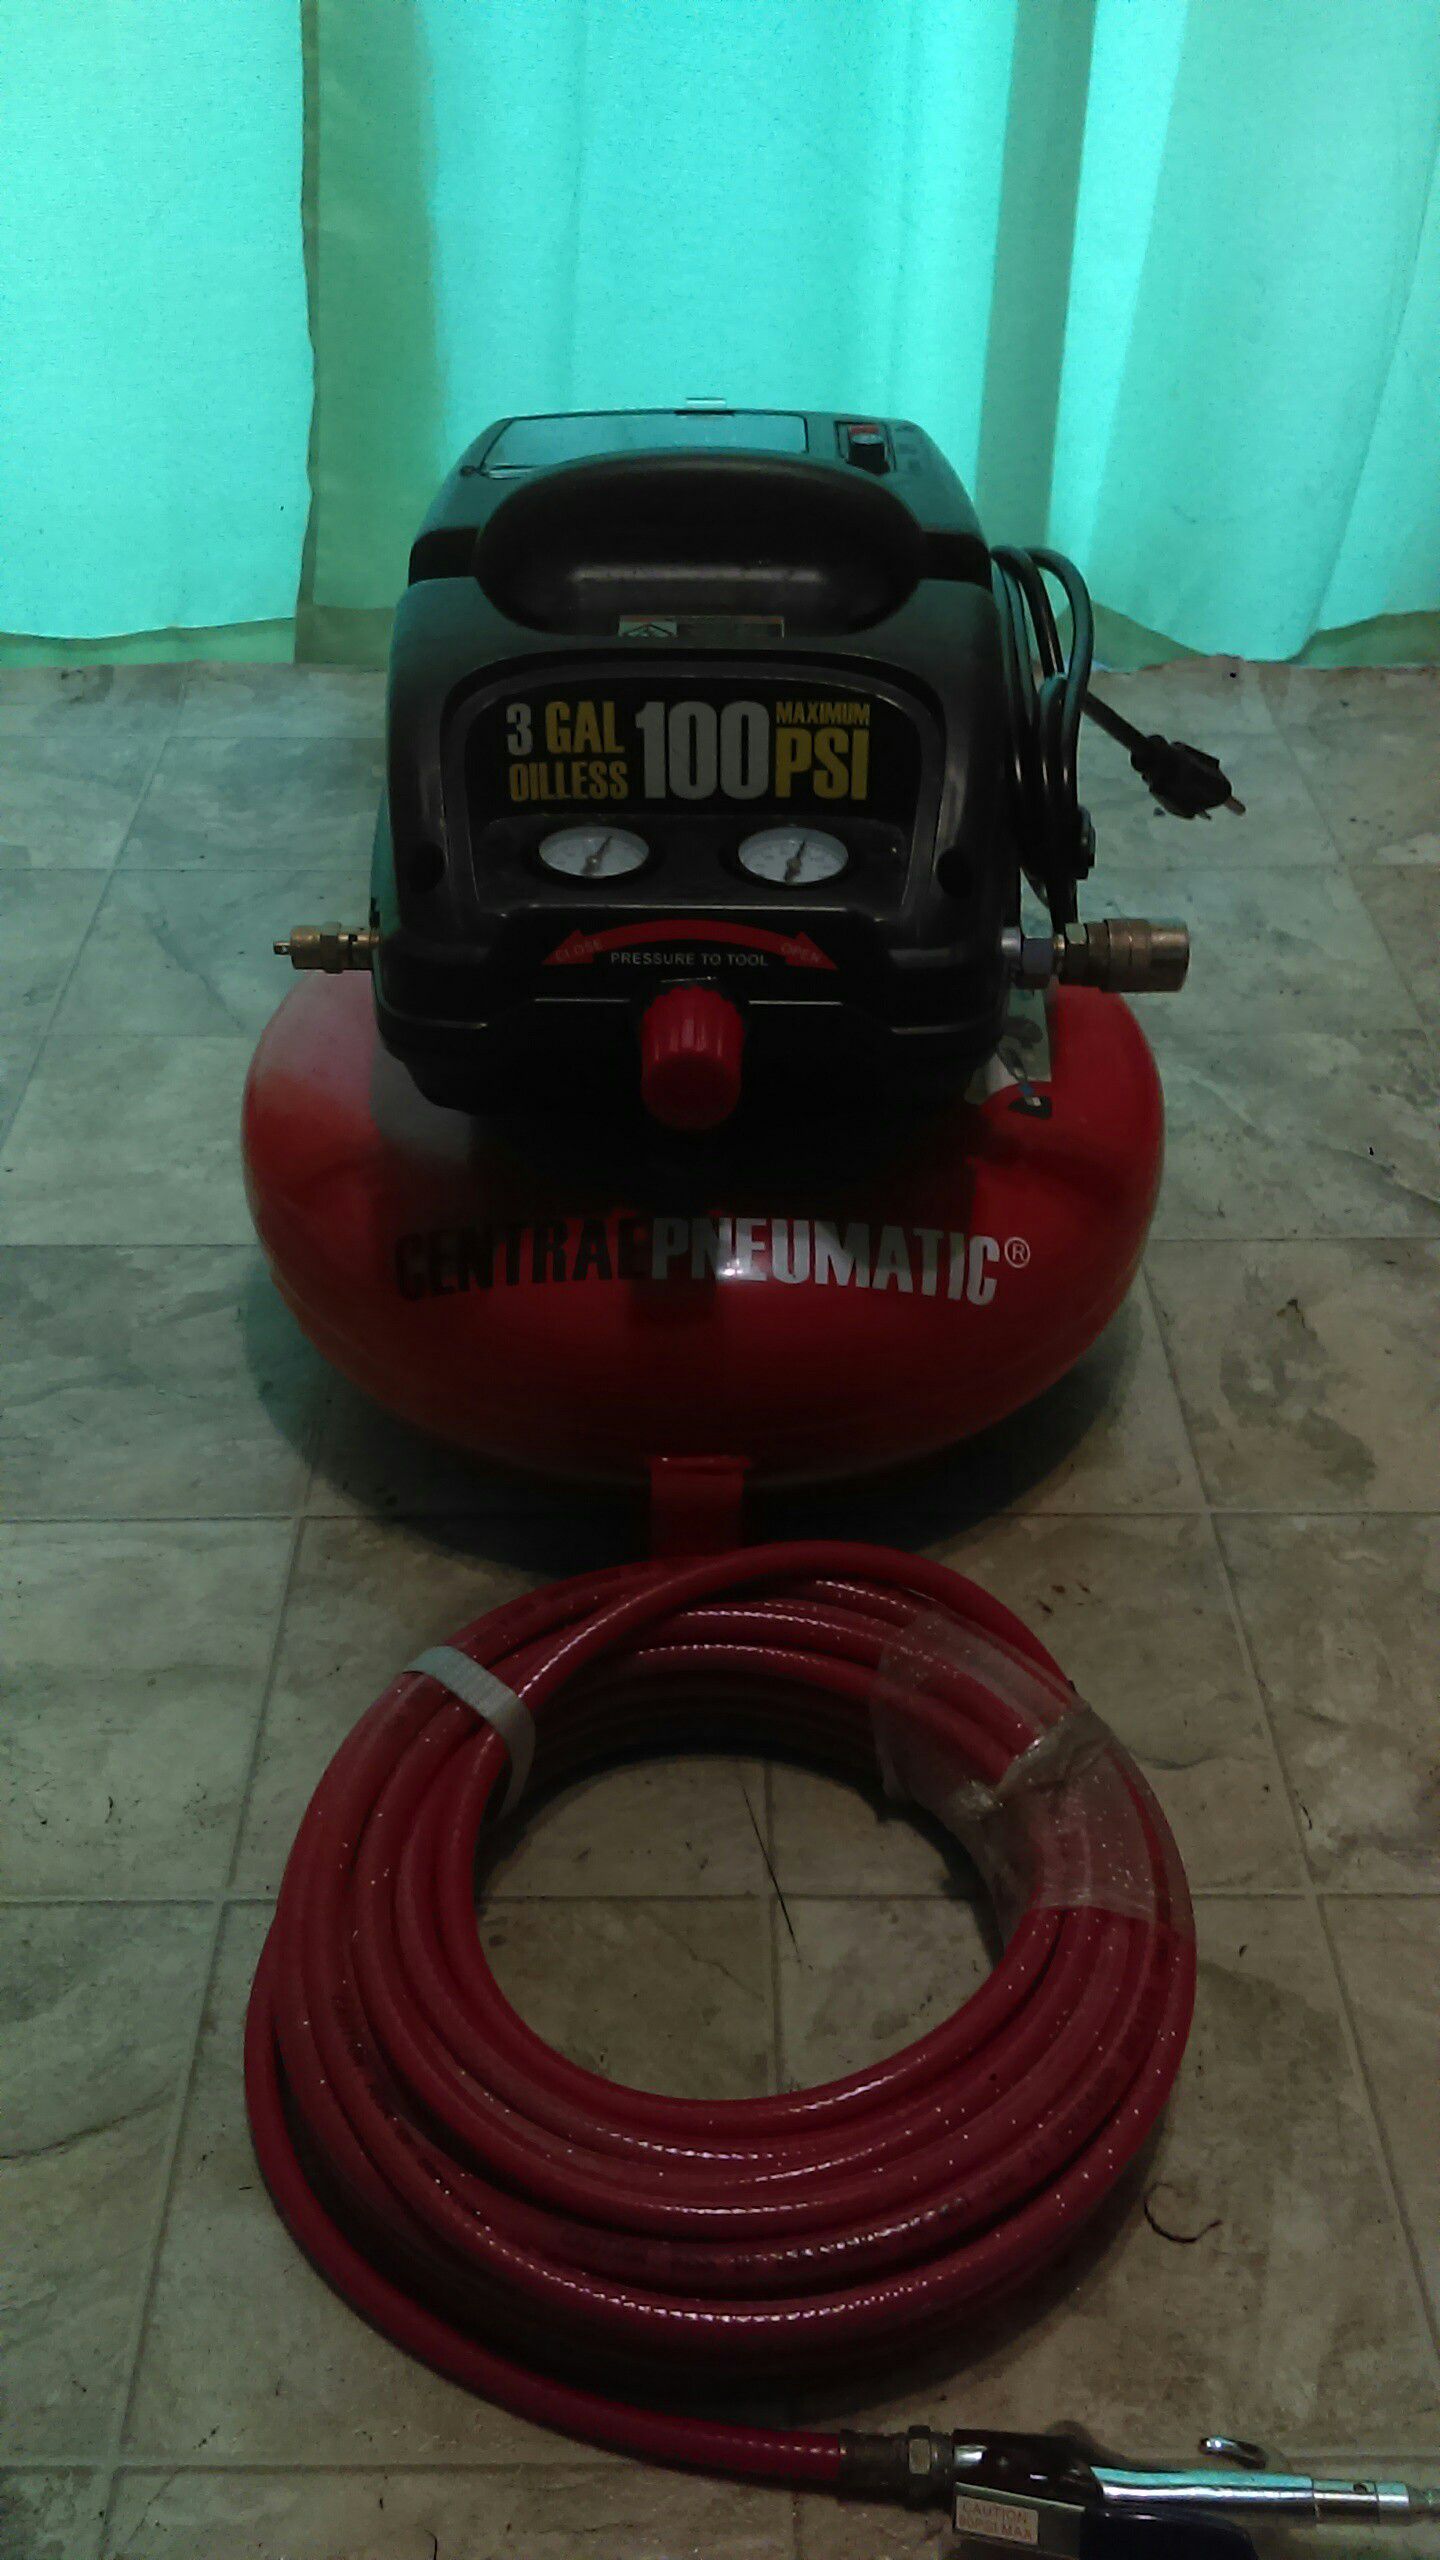 Brand new Air compressor for sale